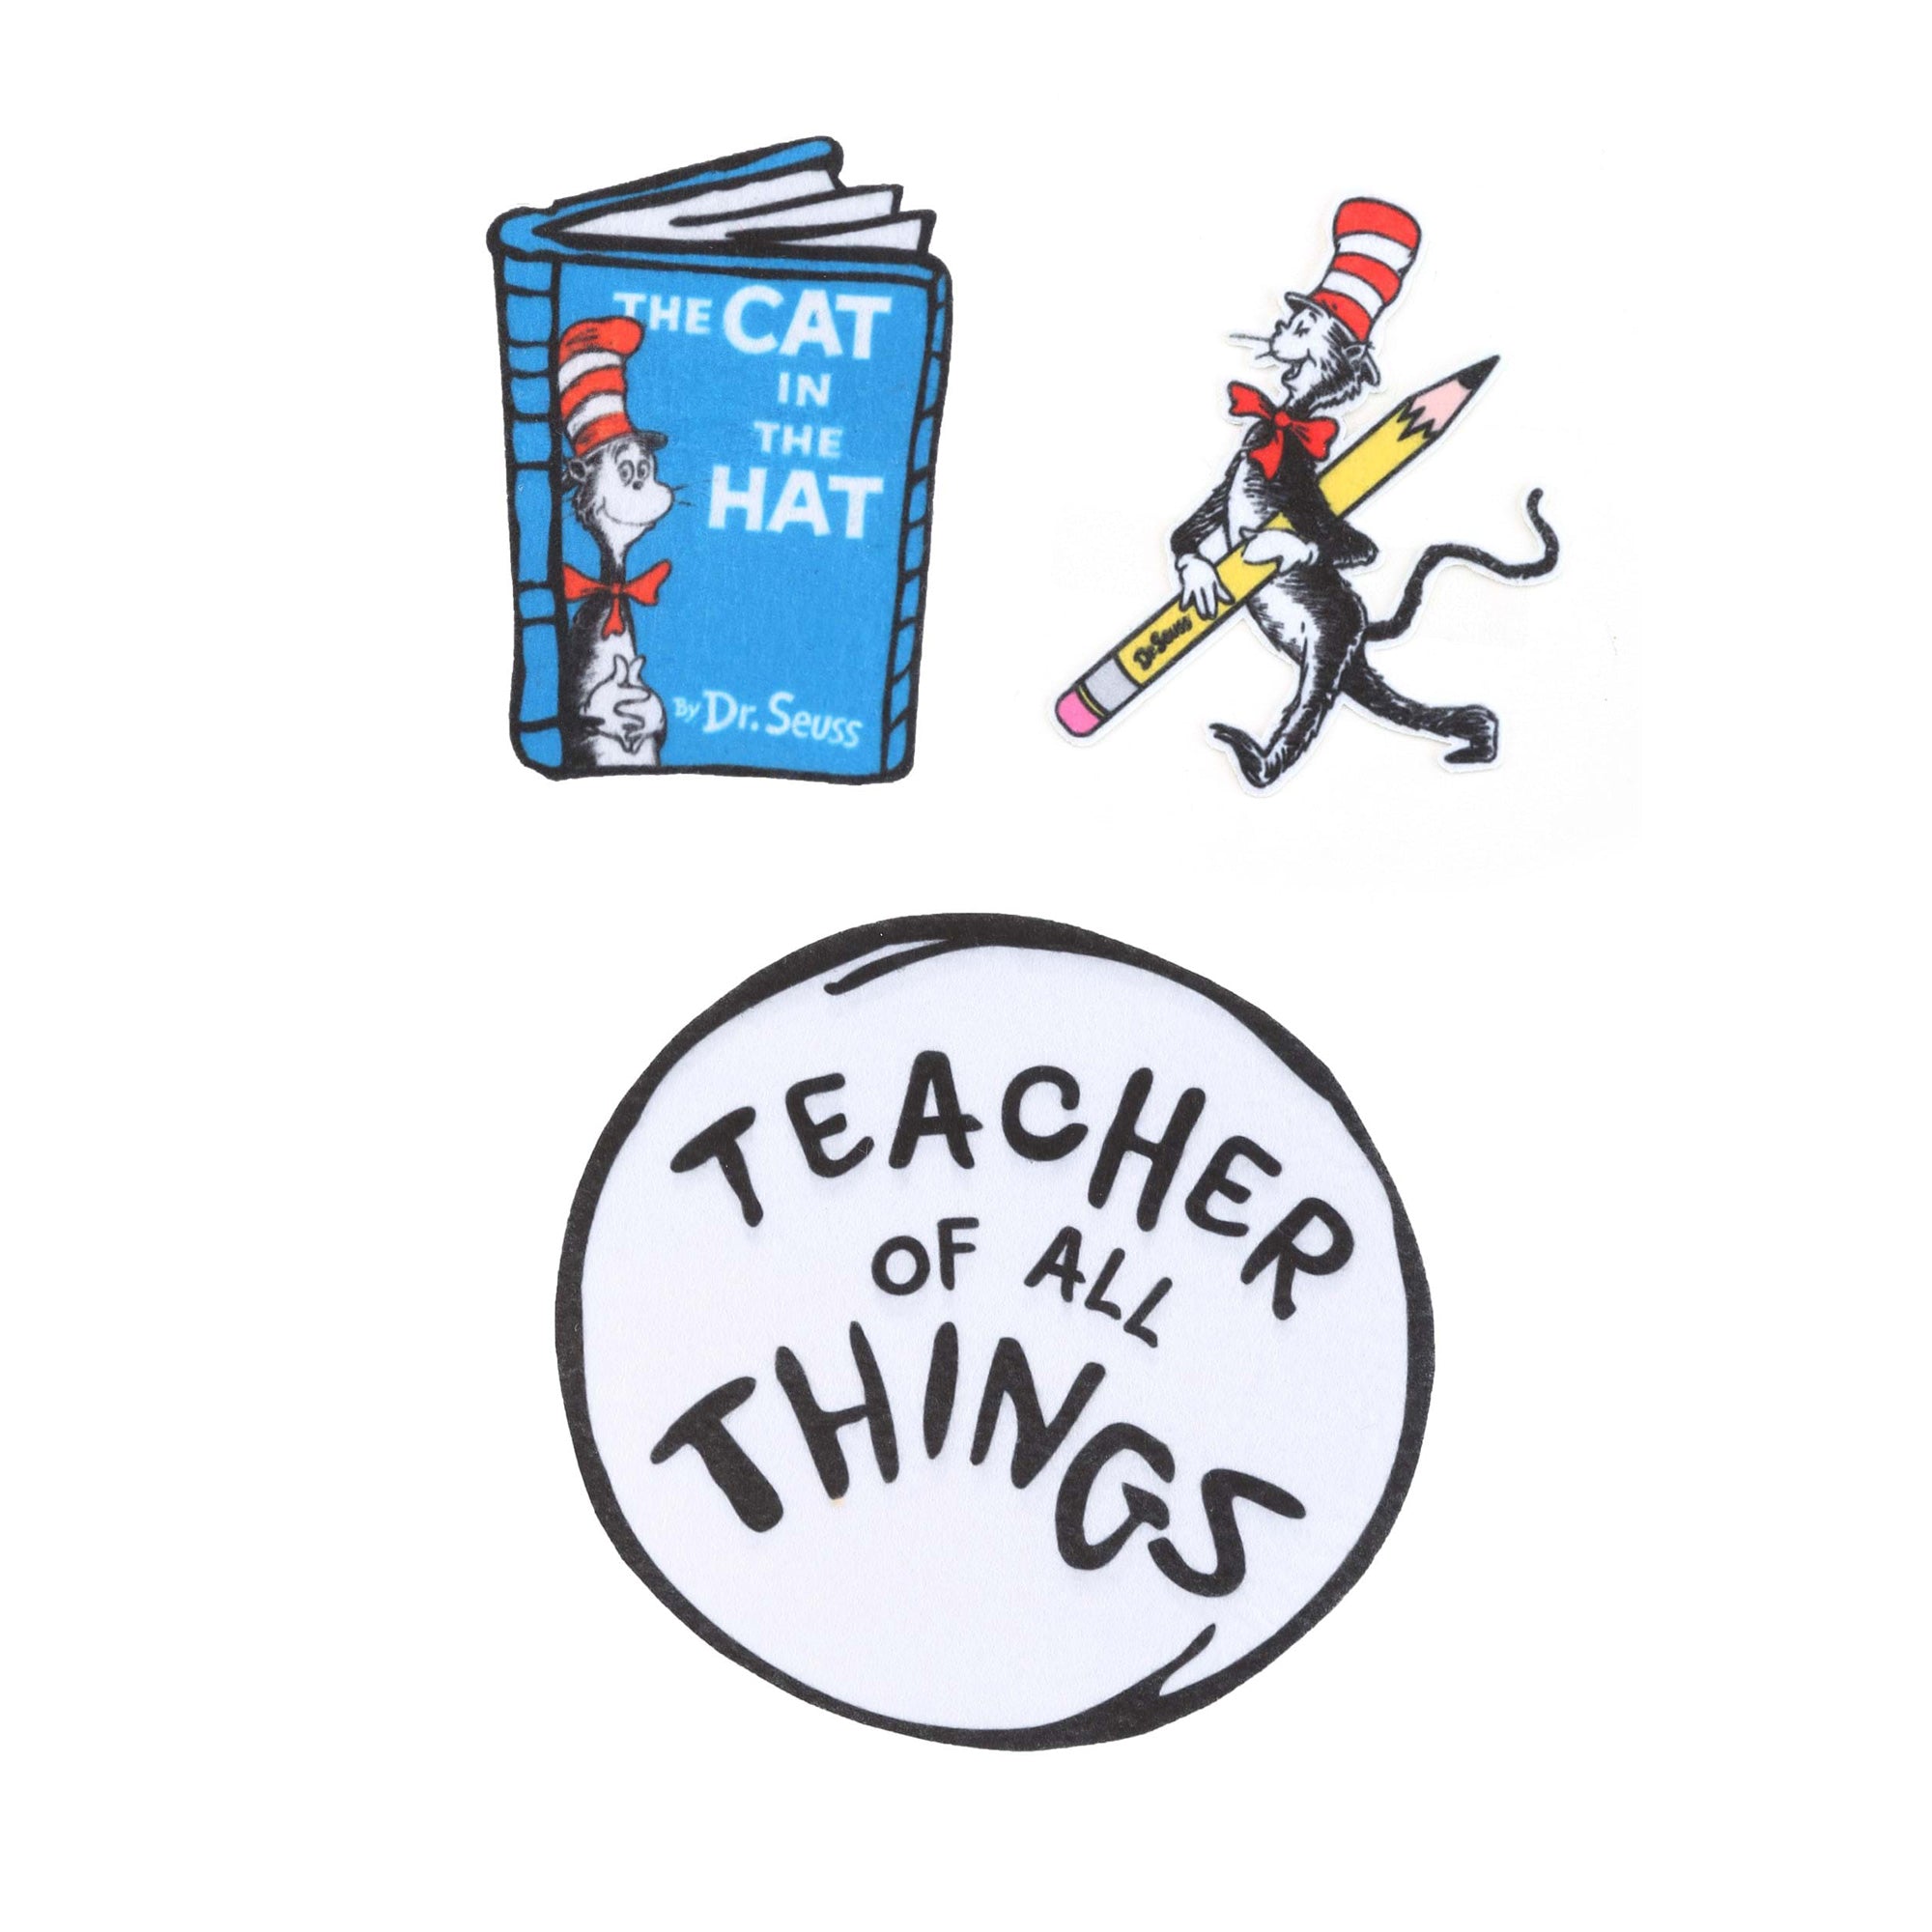 Dr. Seuss Teacher of All Things Cat in the Hat Patches Set